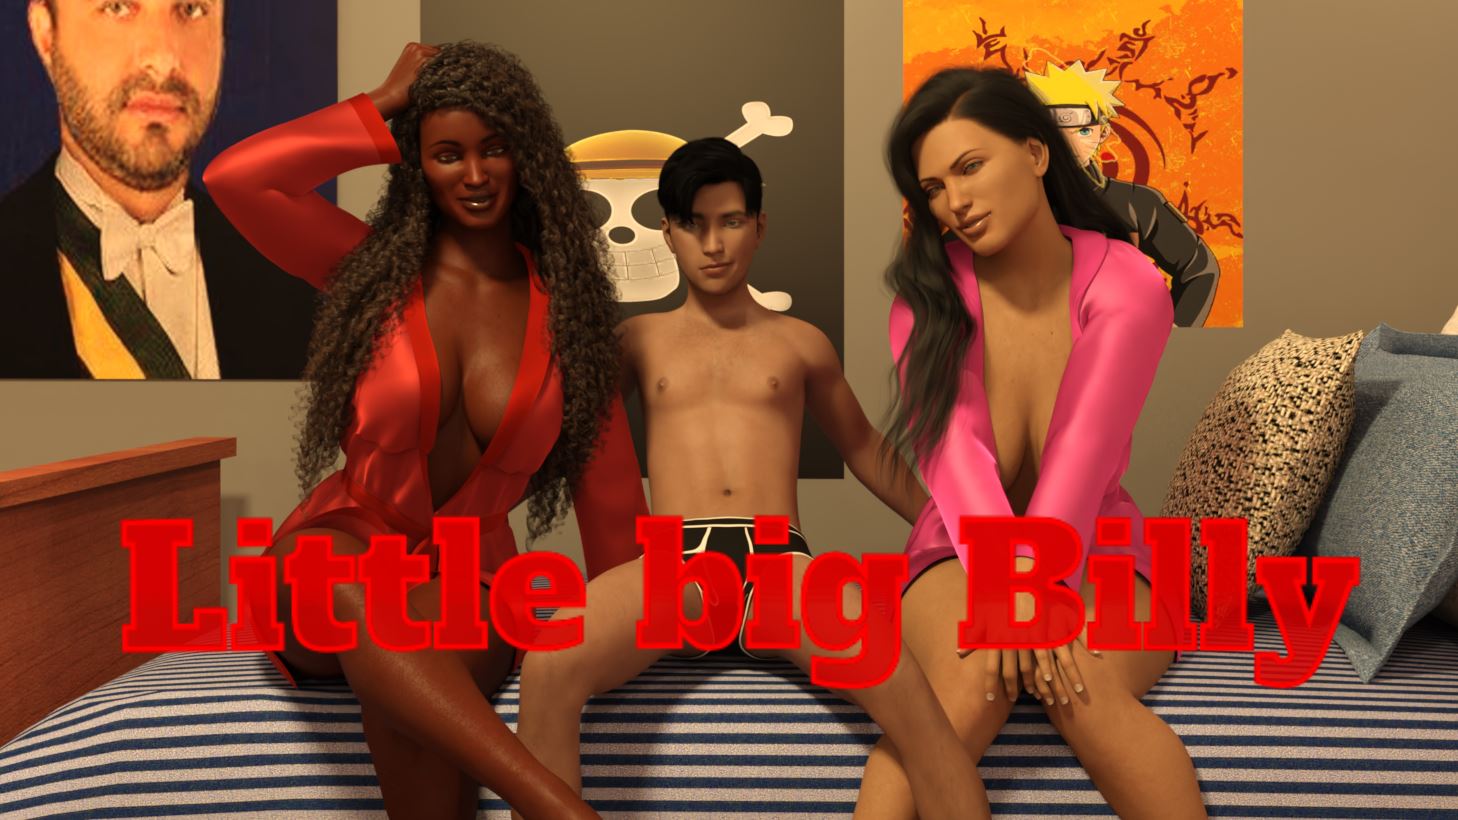 Little Big Billy [Ongoing] - Version: 0.1